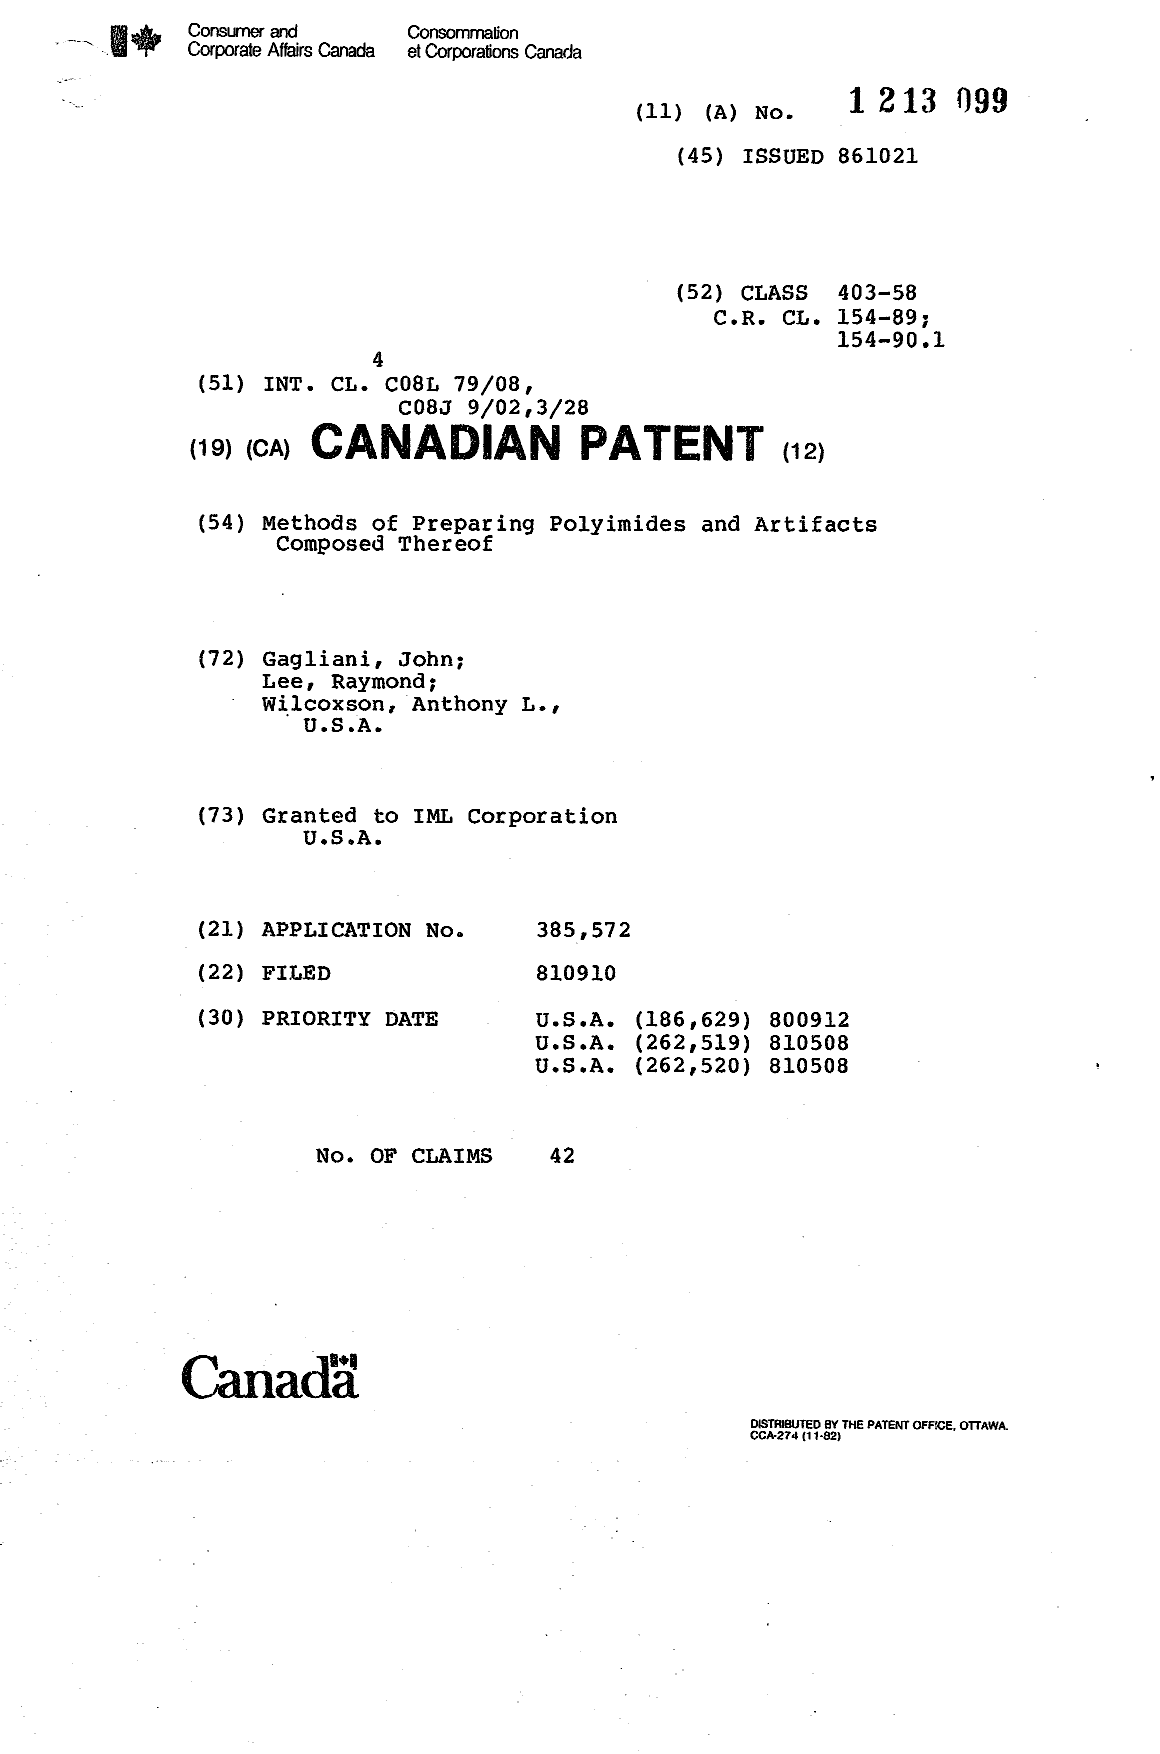 Canadian Patent Document 1213099. Cover Page 19930715. Image 1 of 1